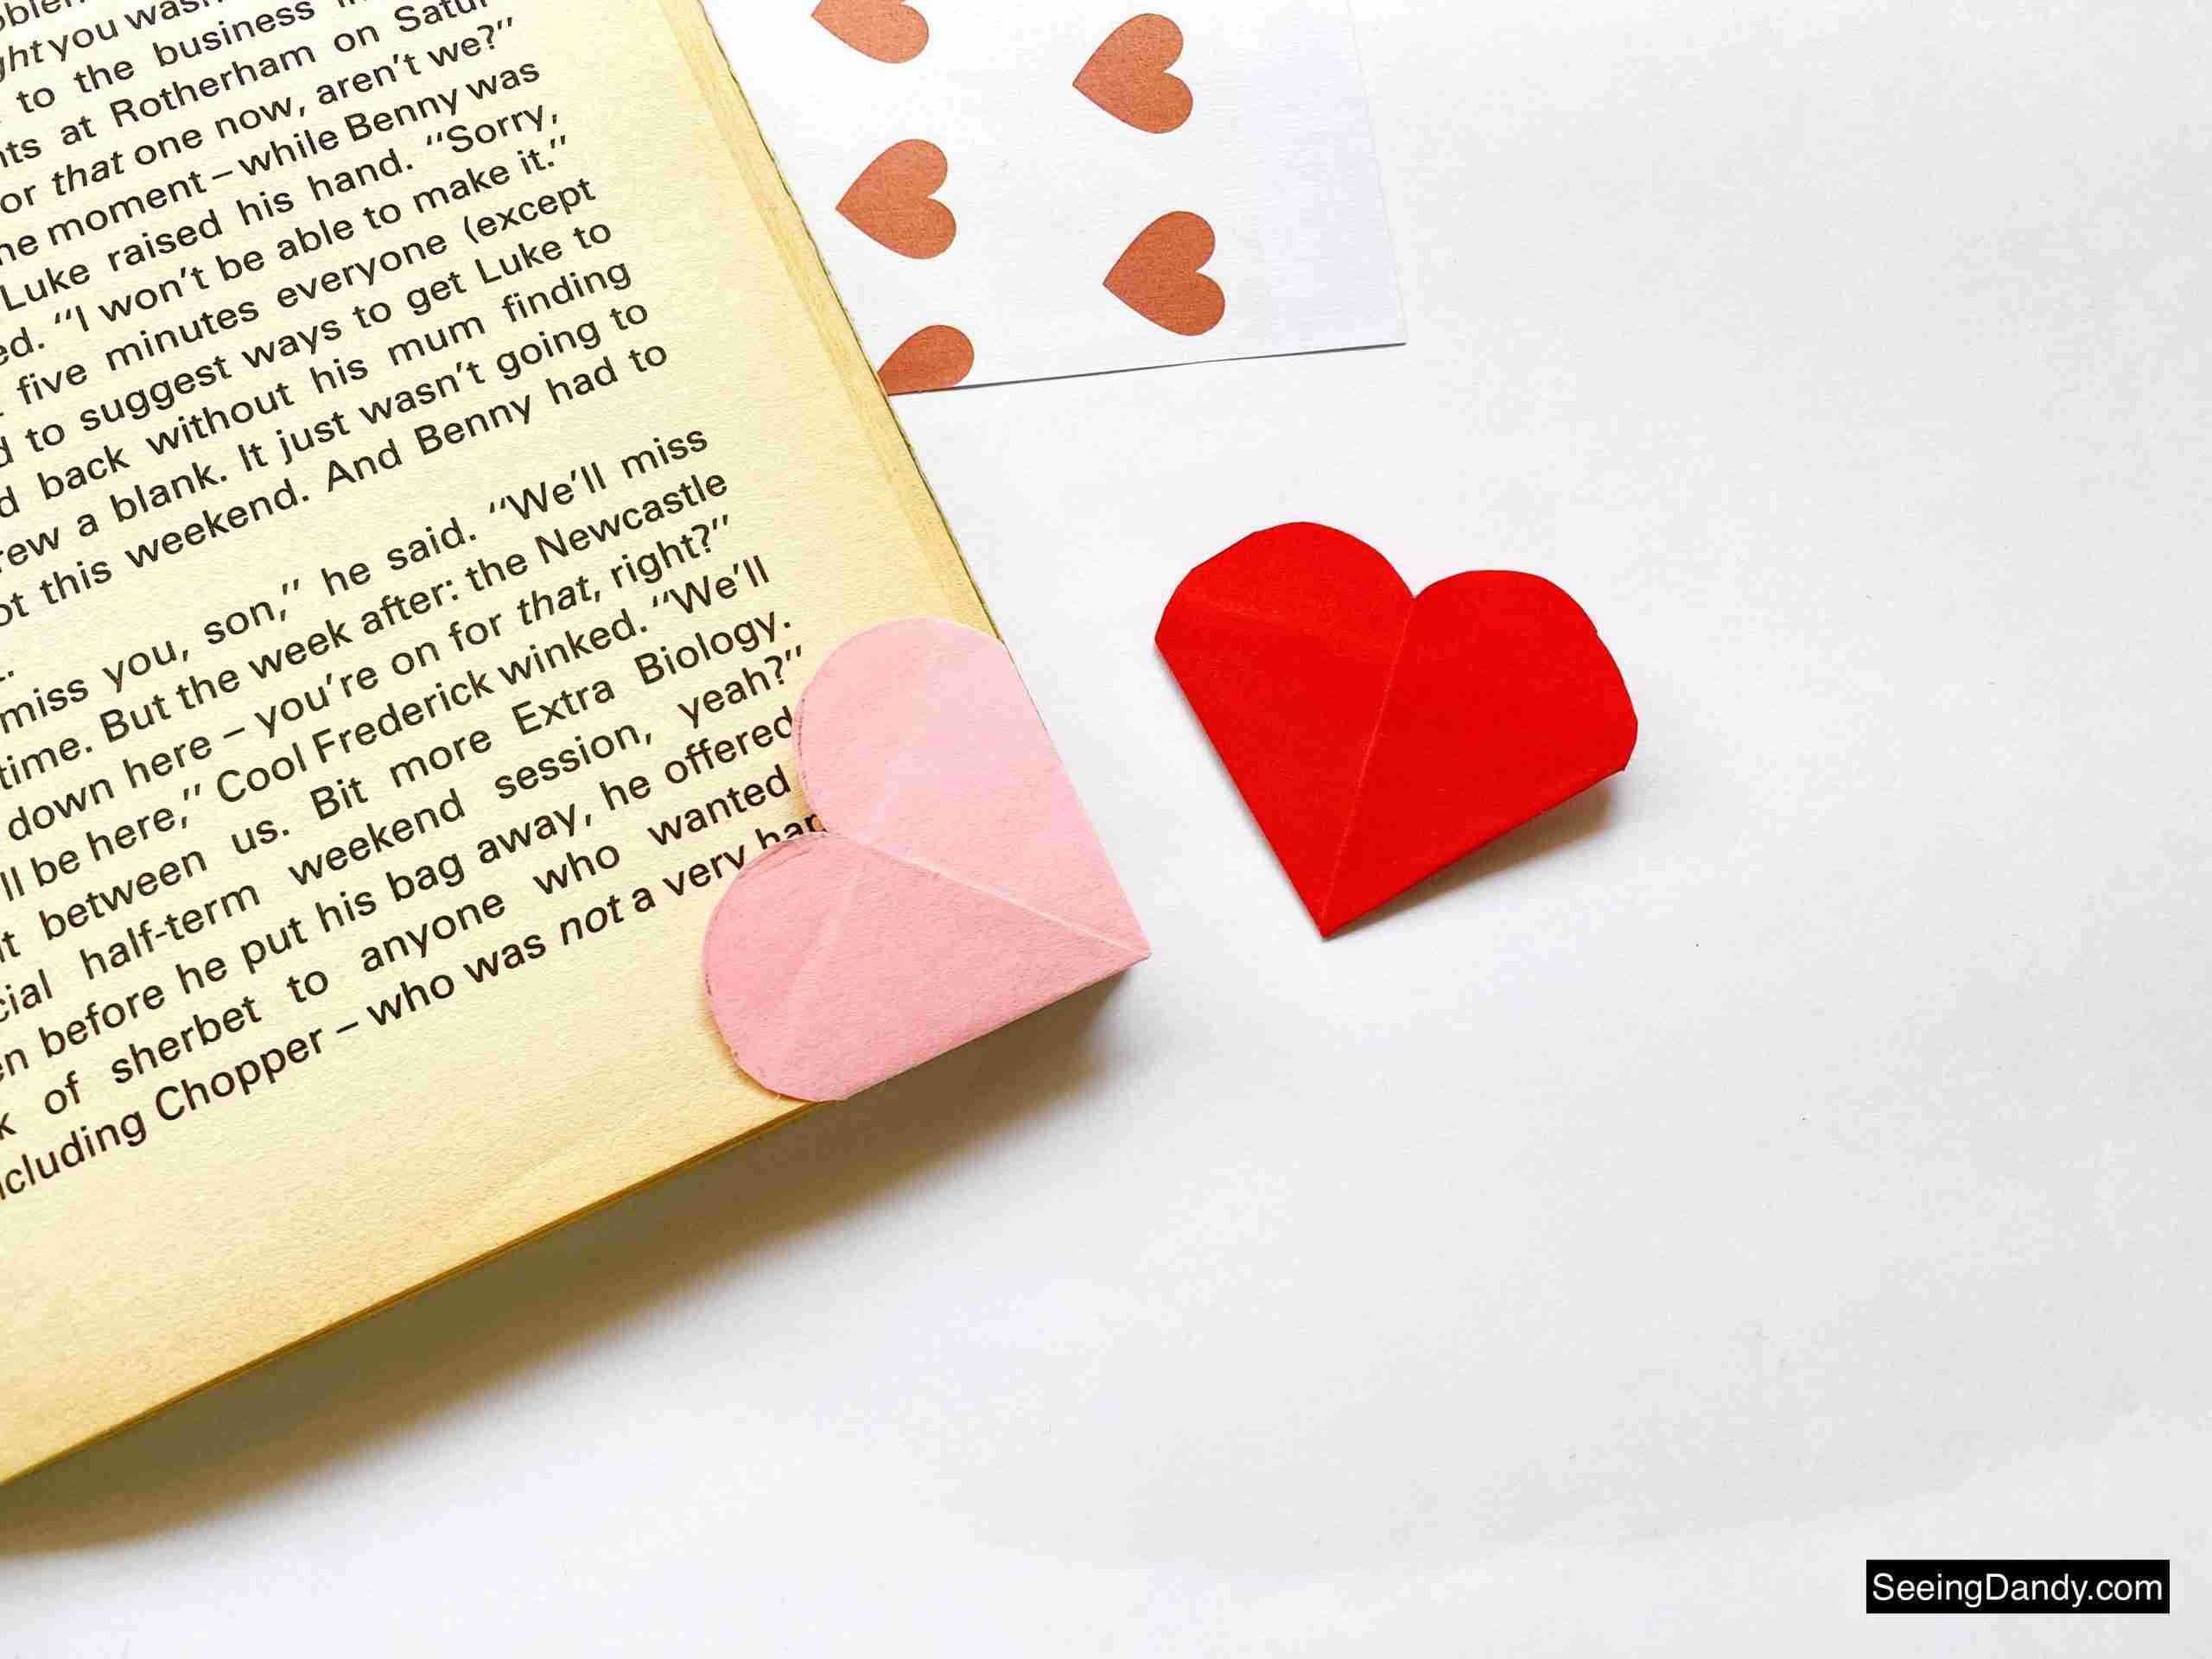 origami heart bookmark, japanese paper folding, paper crafts, valentine card, valentine ideas, easy crafts, diy crafting, school party ideas, valentine party, valentine origami, diy bookmarks